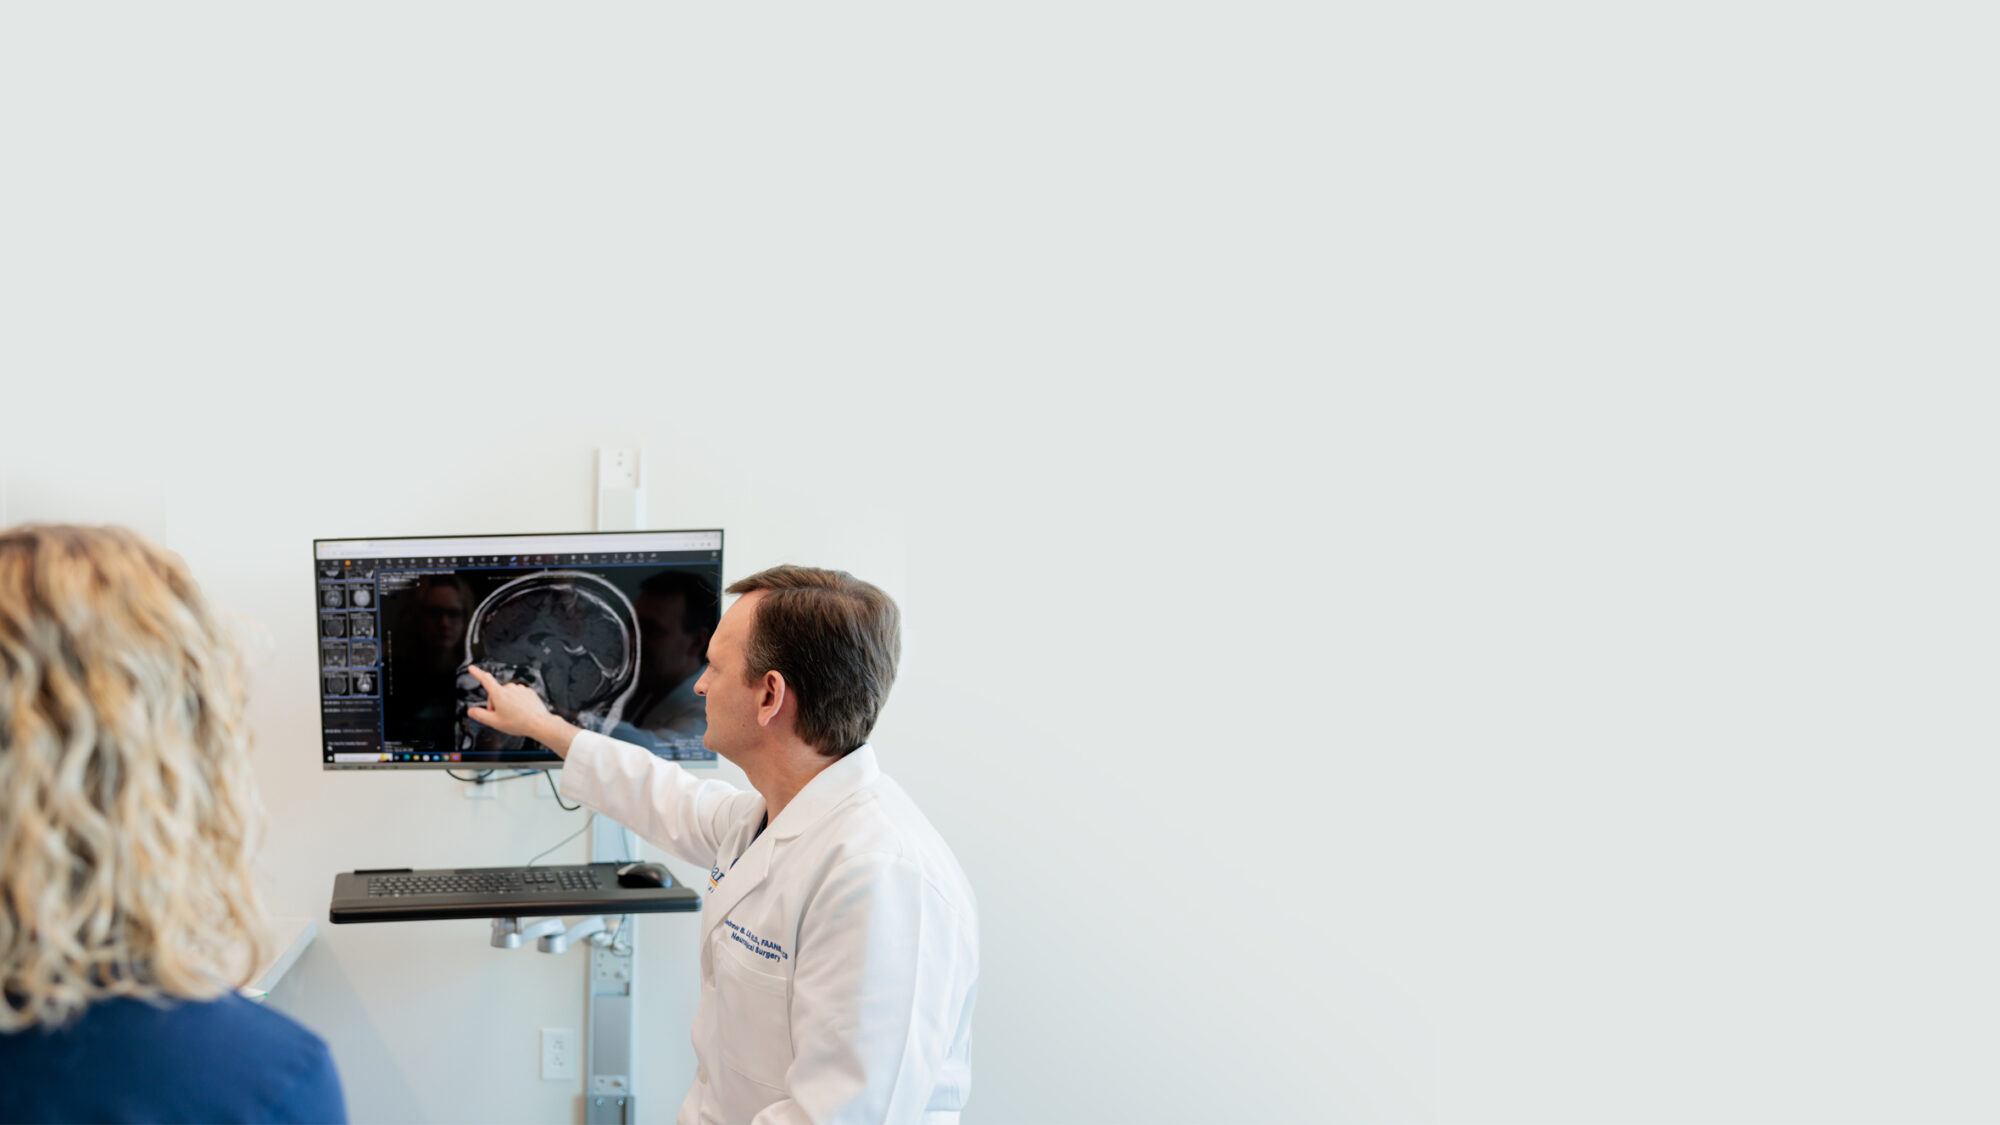 pituitary neurosurgeon andrew little discusses an mri scan with a patient